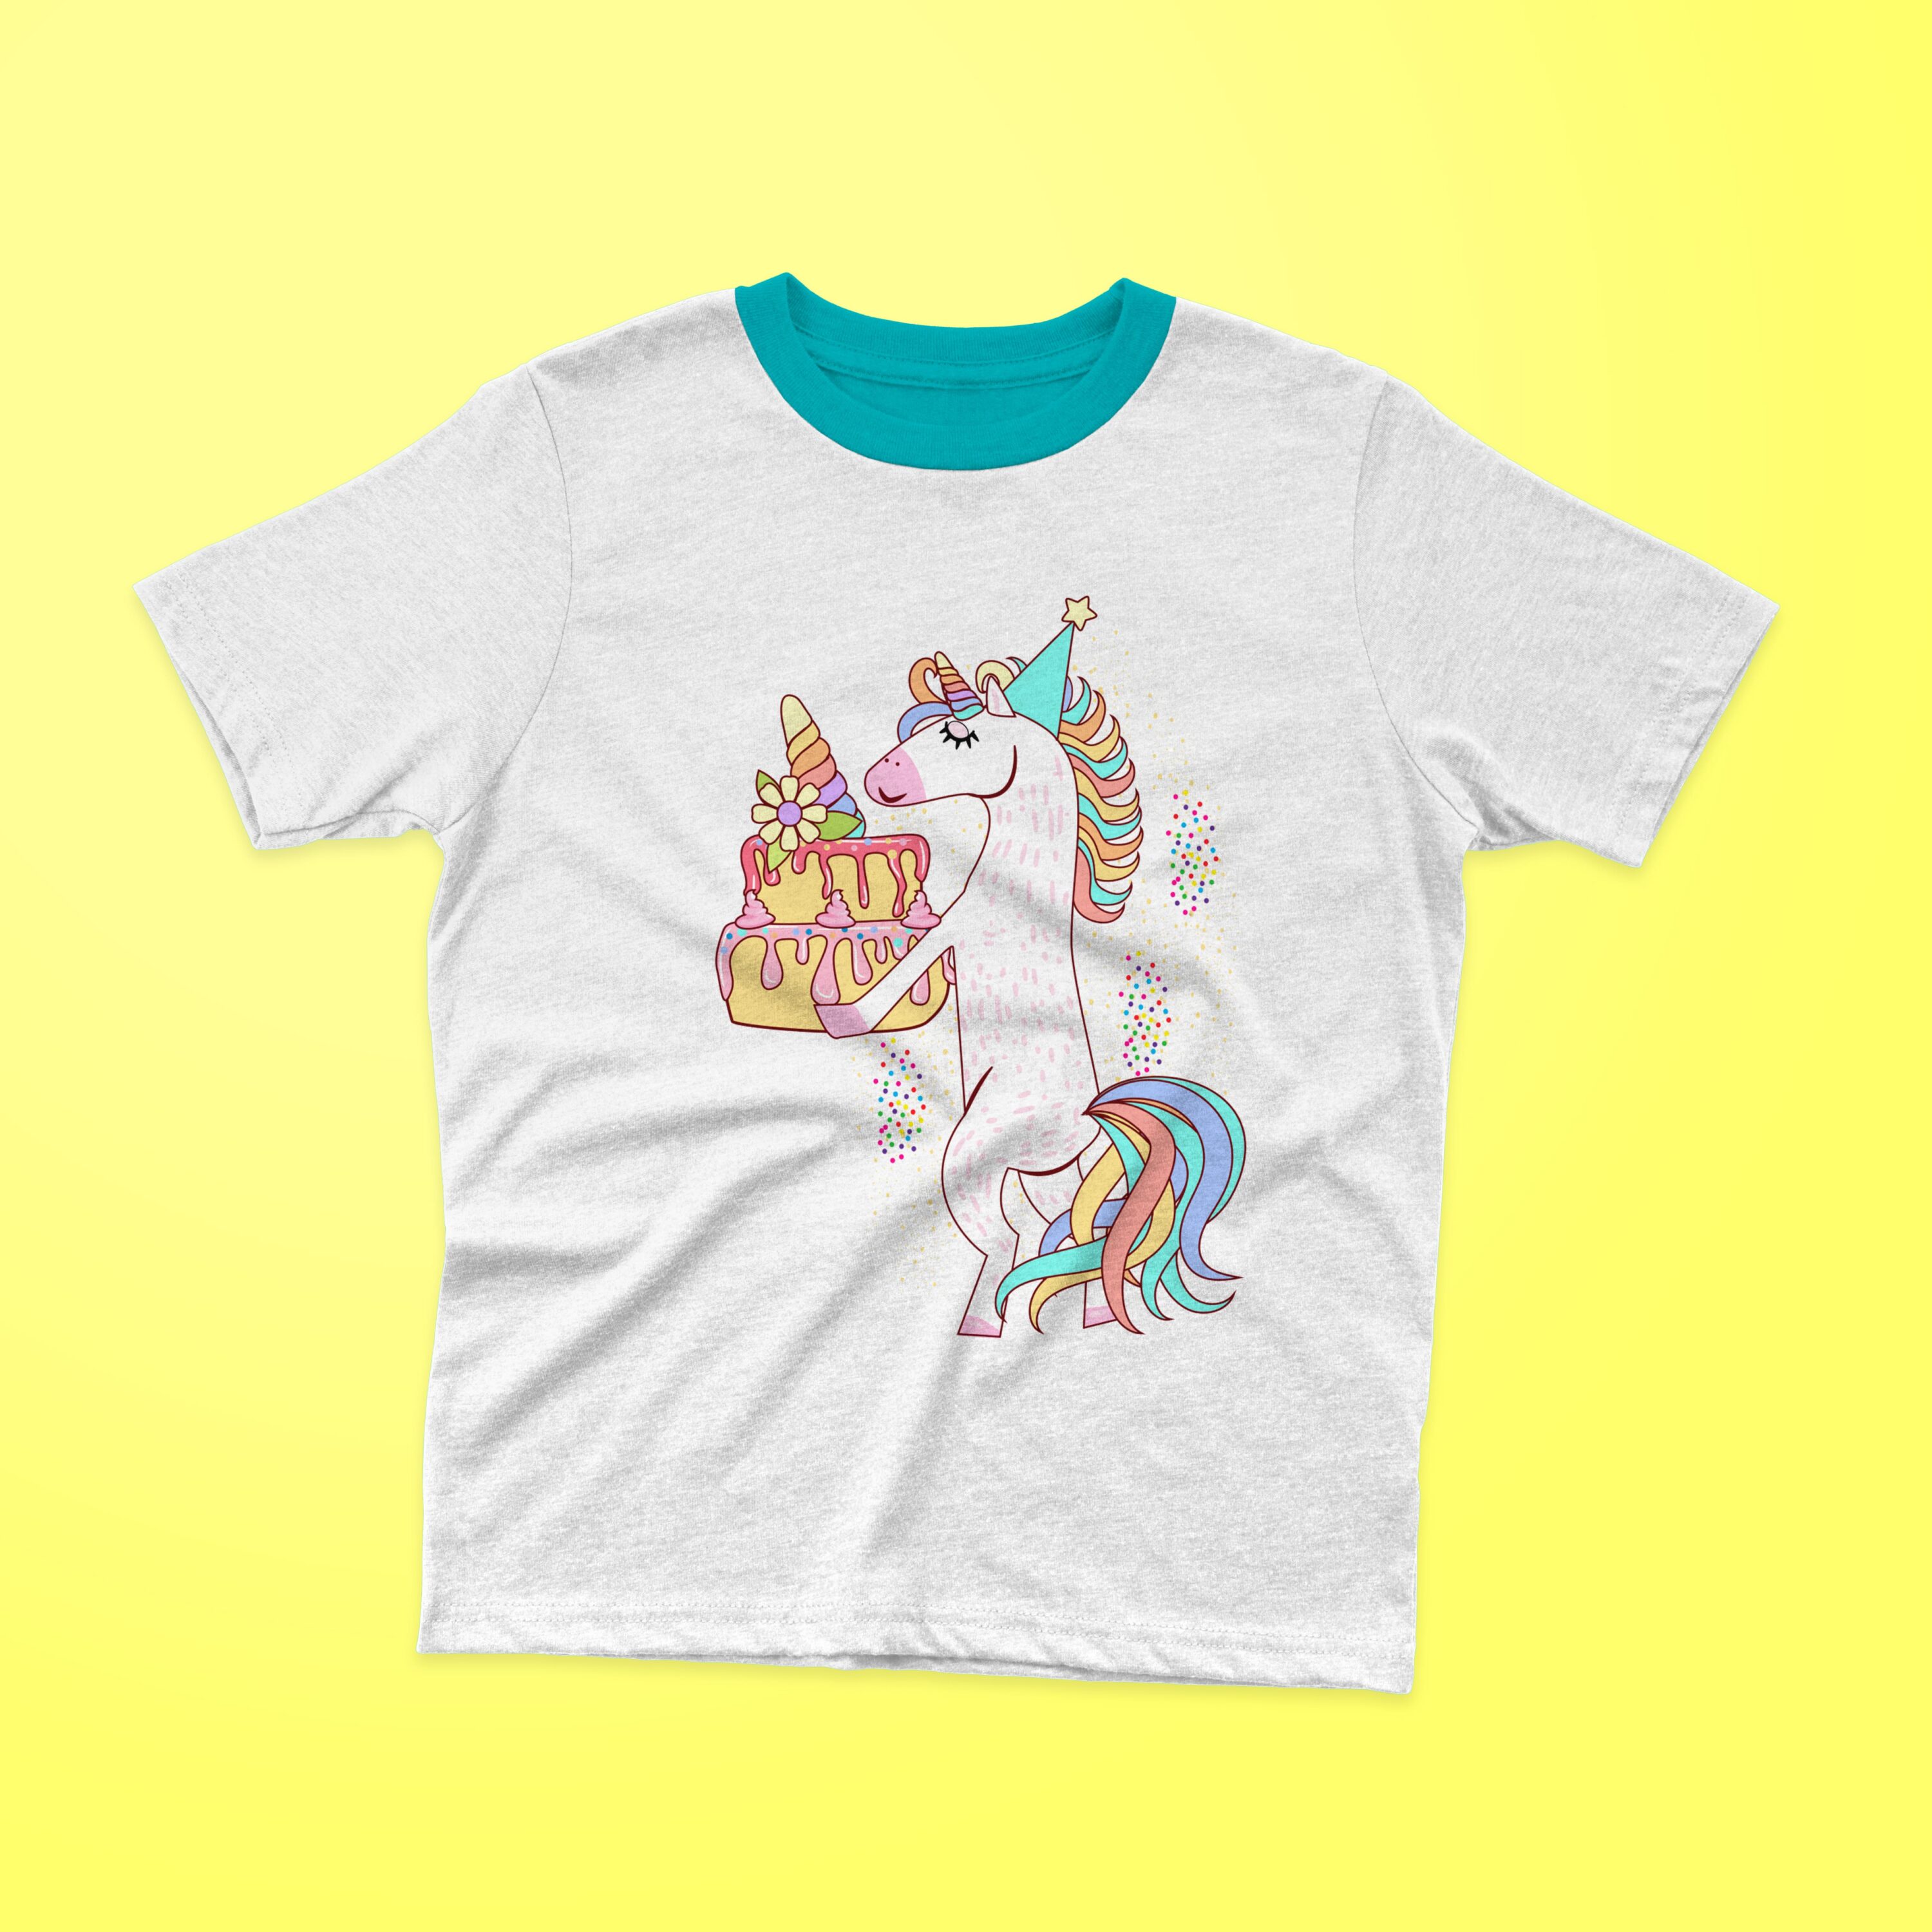 White t-shirt with a turquoise collar and a unicorn holding a birthday cake on a yellow background.